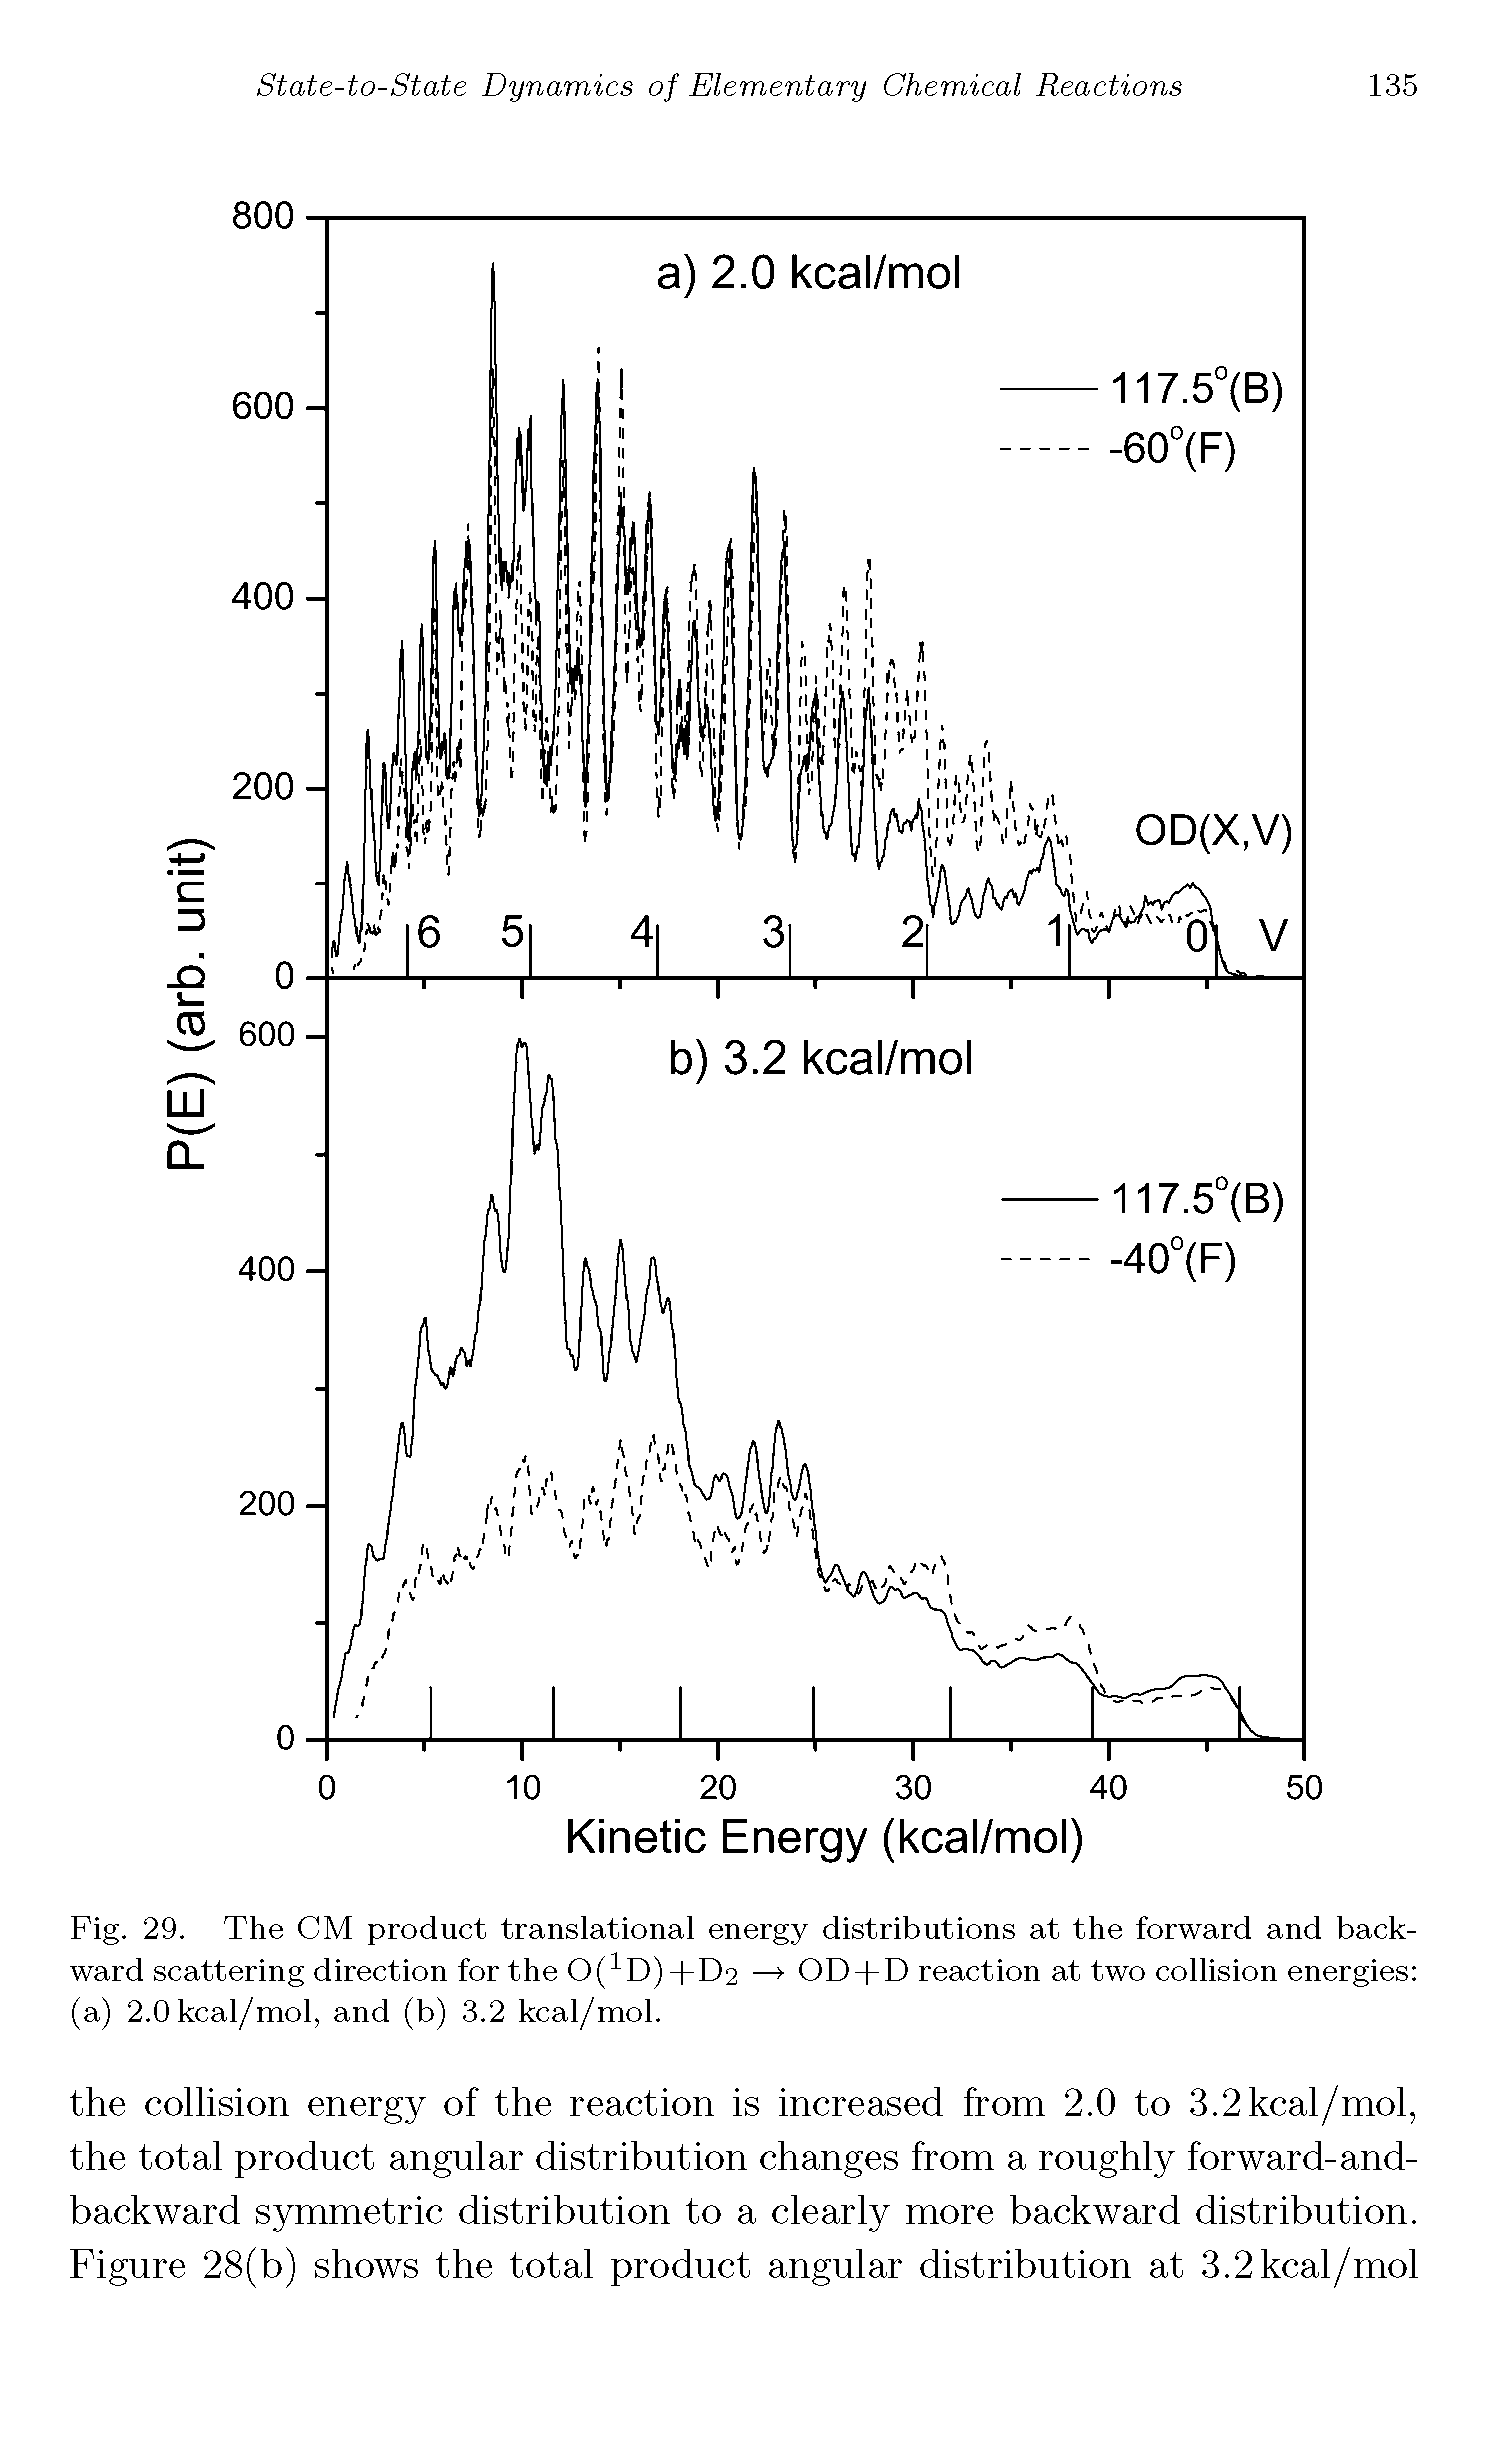 Fig. 29. The CM product translational energy distributions at the forward and backward scattering direction for the 0(1D) +D2 — OD + D reaction at two collision energies (a) 2.0 kcal/mol, and (b) 3.2 kcal/mol.